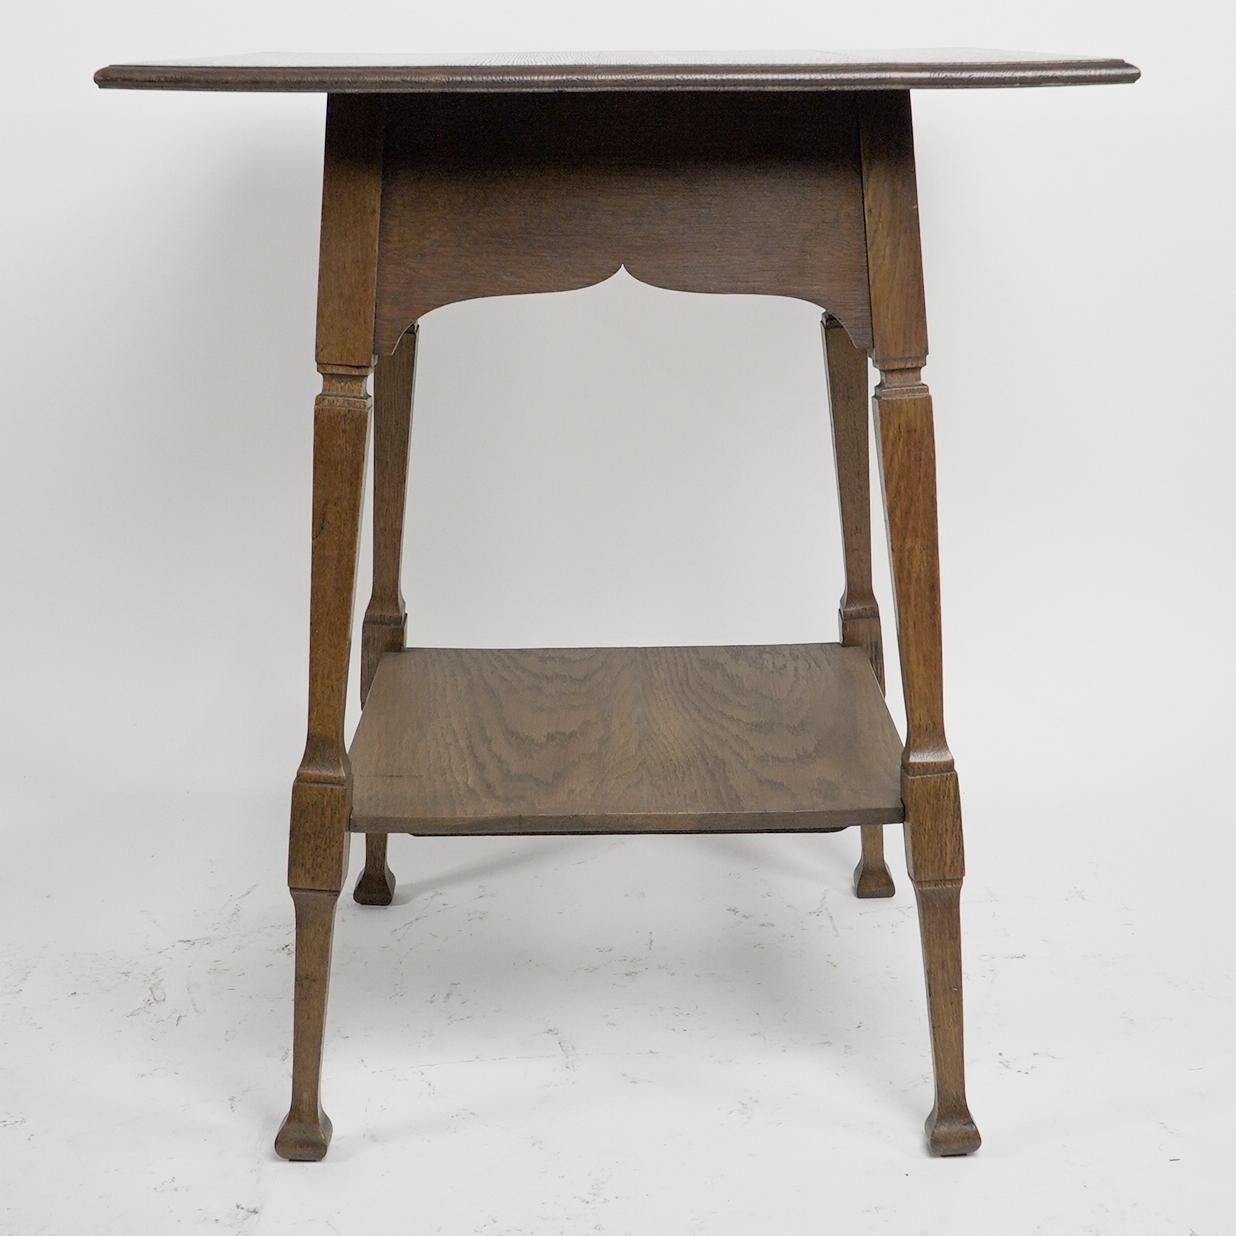 Liberty and Co (attributed). An Arts and Crafts oak two tier side table with Moorish aprons underneath the top.
